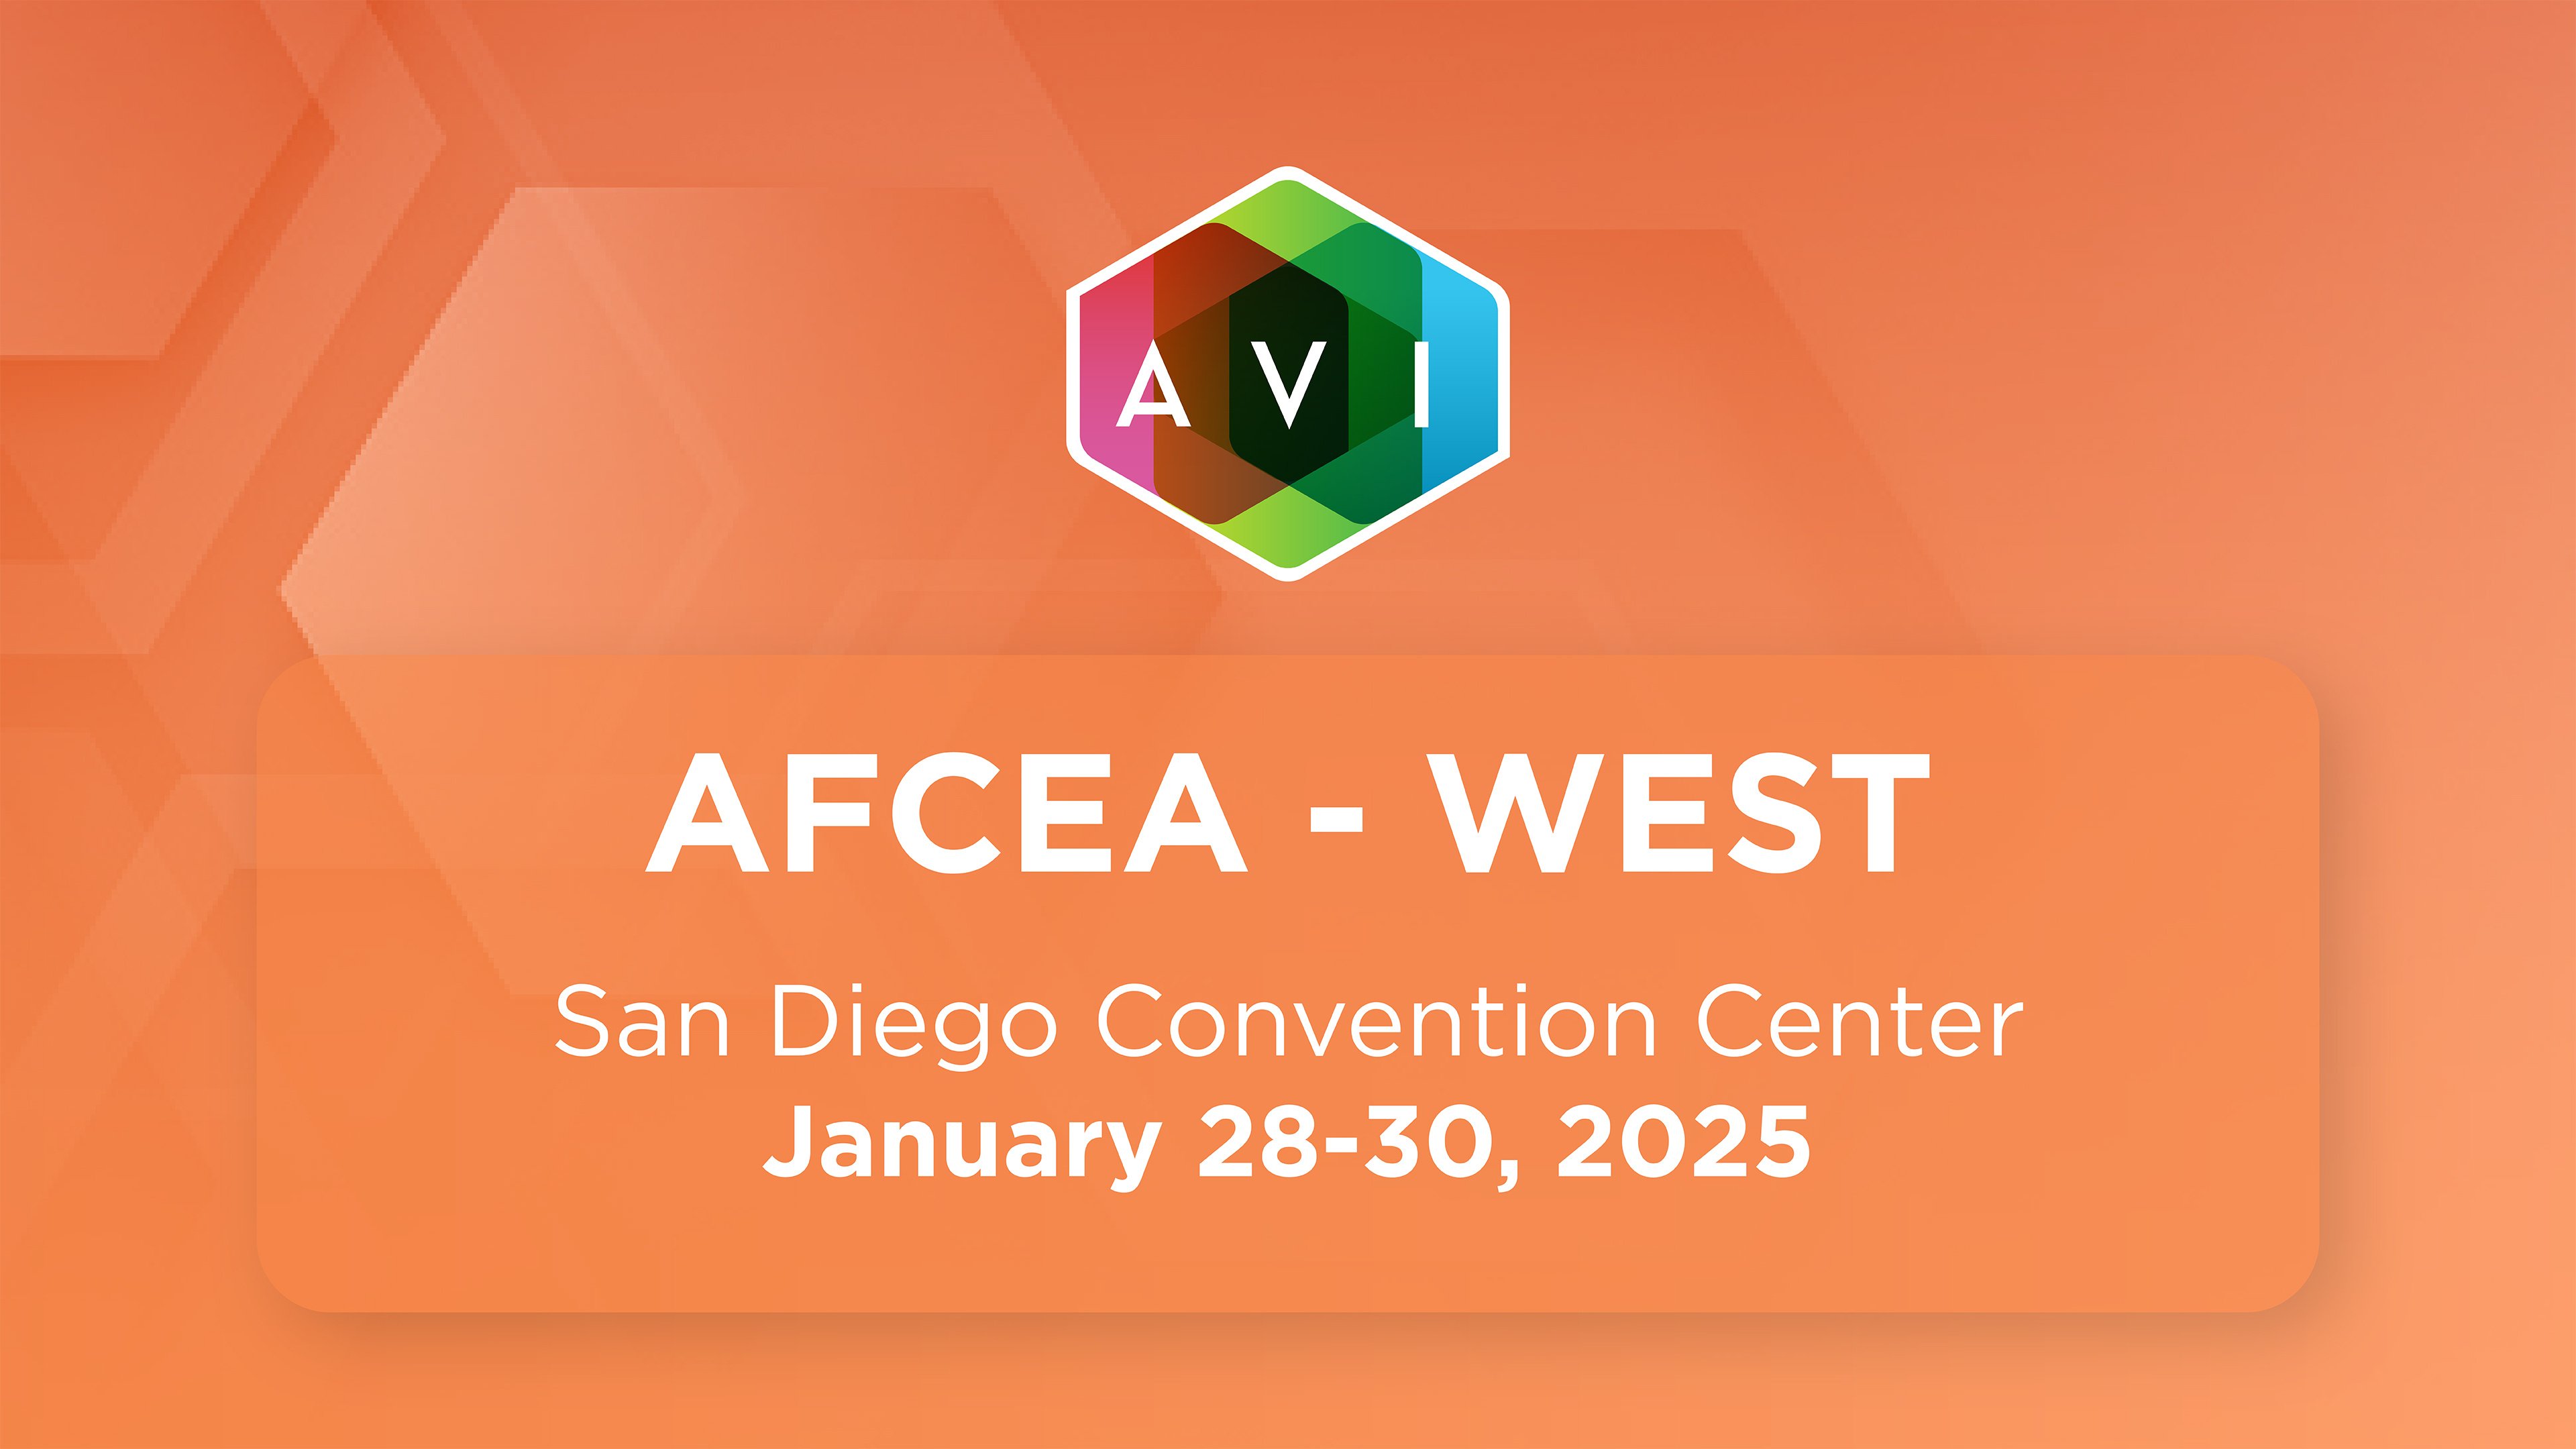 Image{width=3840,height=2160,url='https://www.avisystems.com/hubfs/events/additional-events/2024/AFCEA-west-event-page-thumbnail.jpg',altText='AFCEA-west-event-page-thumbnail',fileId=171810437130}